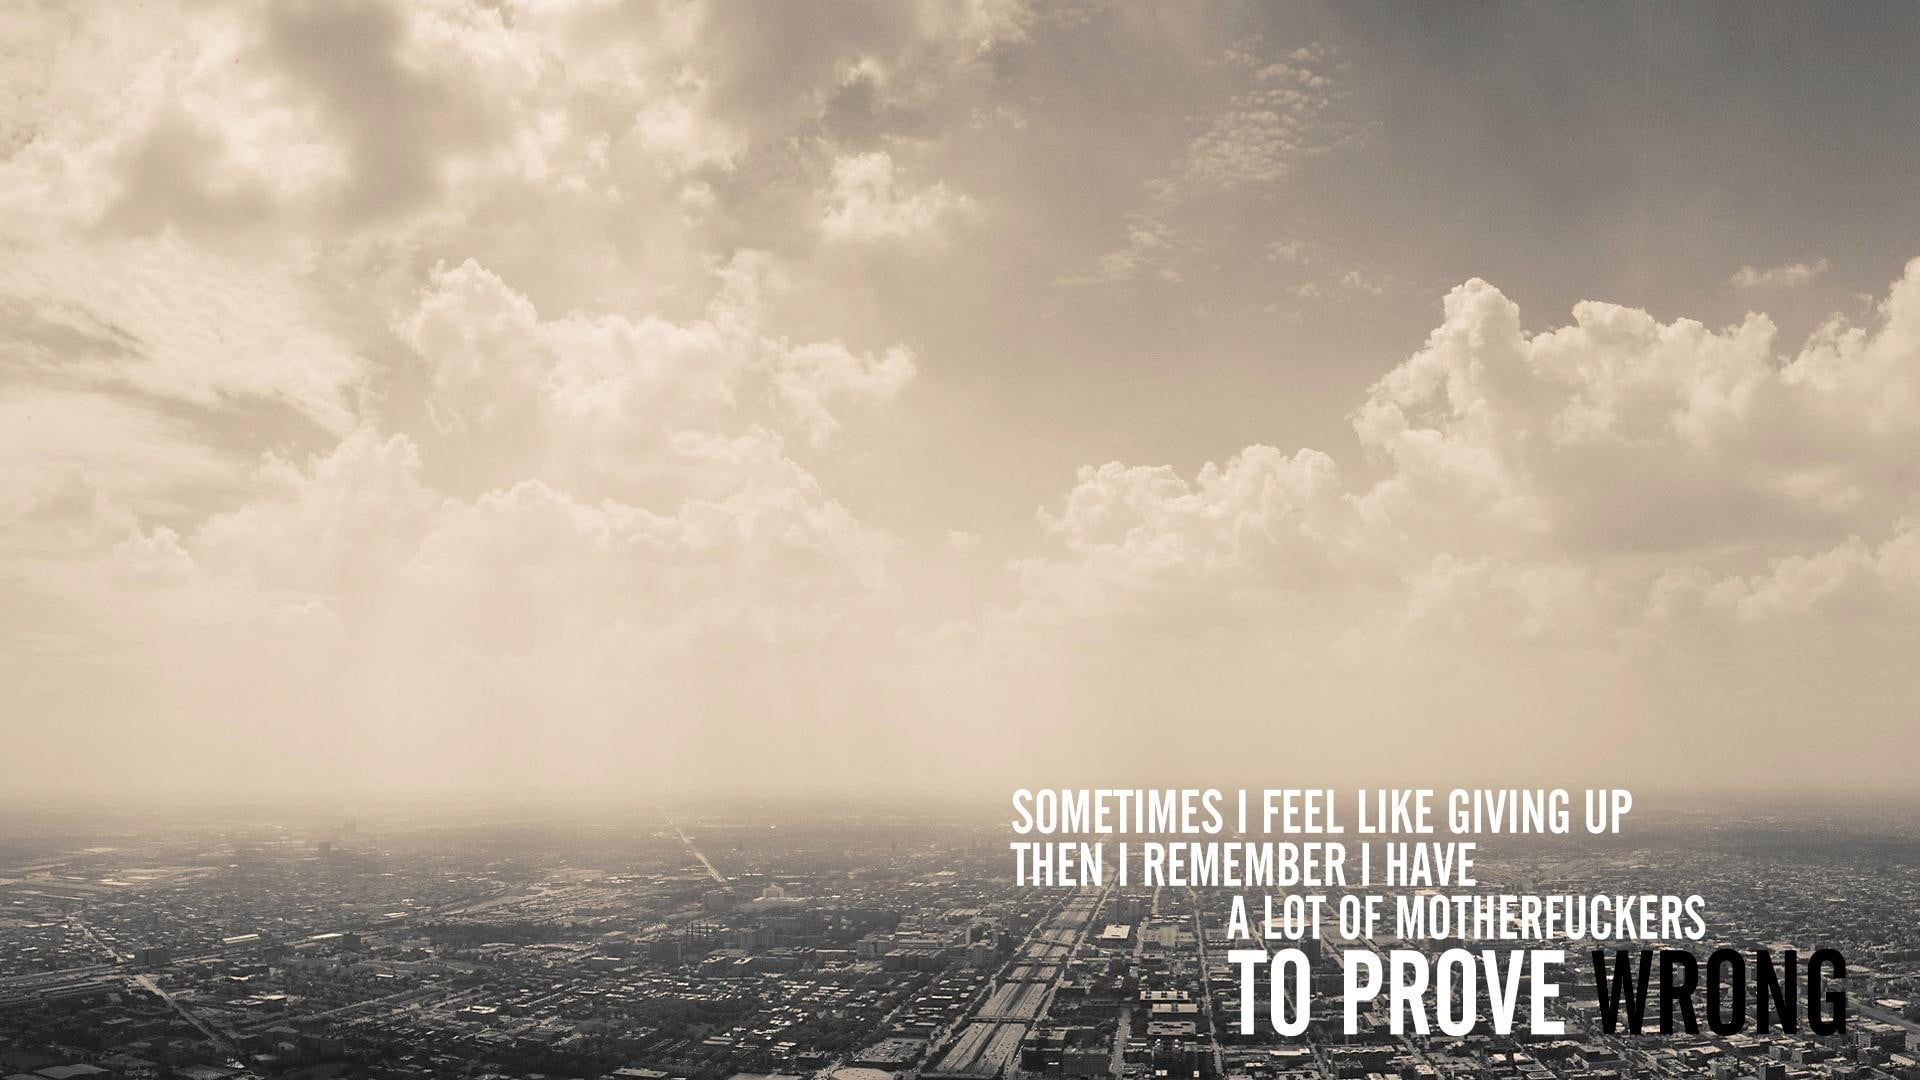 Wallpaper city buildings with text overlay, bird's eye vie city quote text overlay • Wallpaper For You HD Wallpaper For Desktop & Mobile